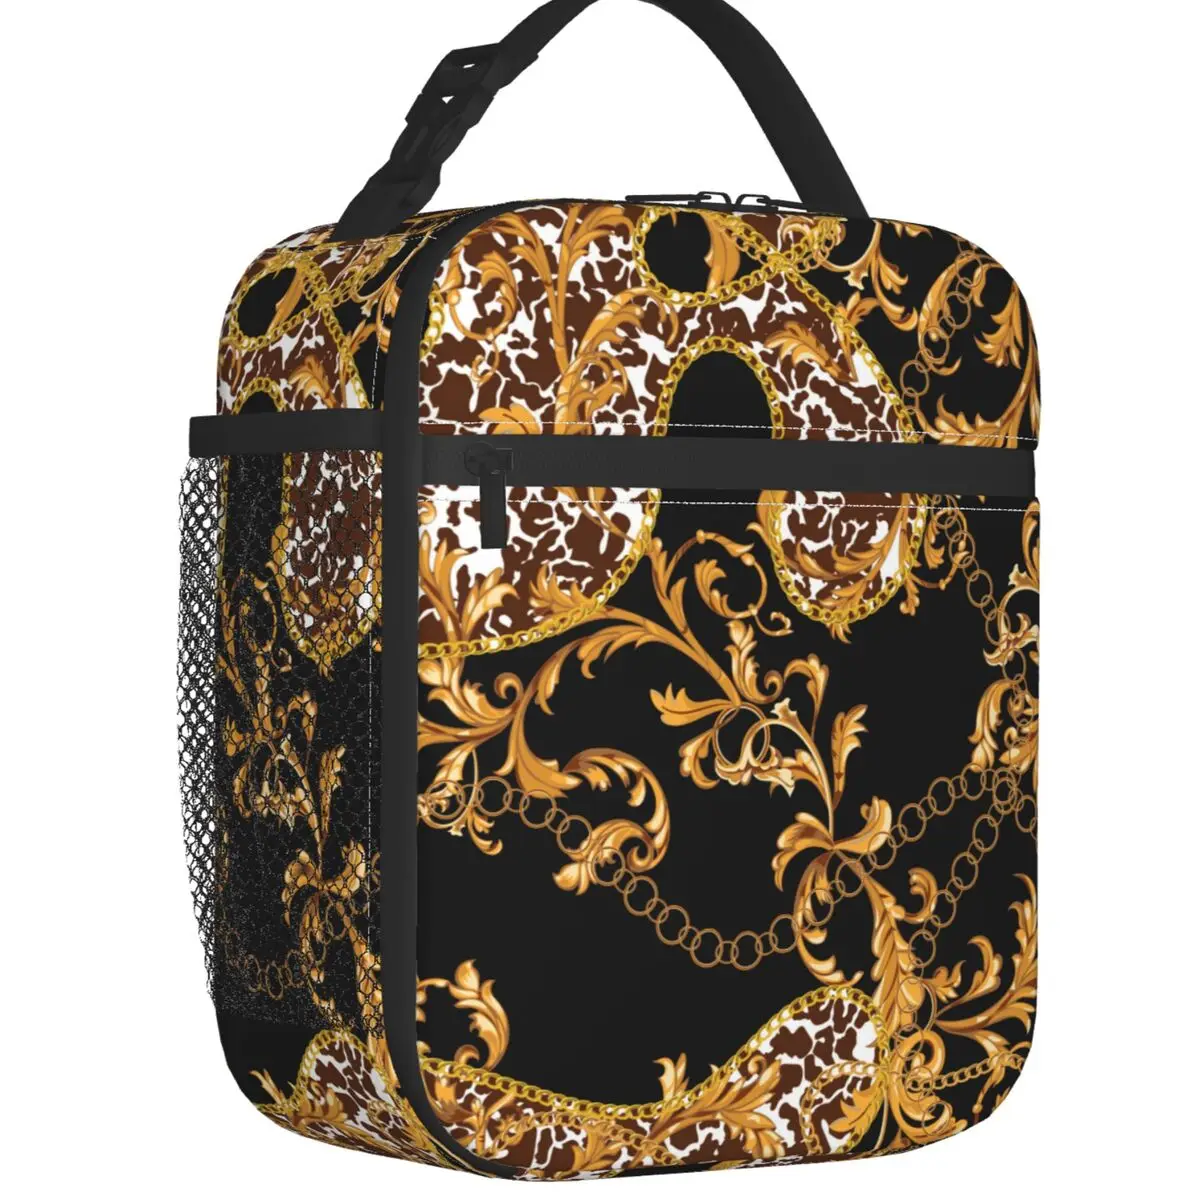 Baroque Floral Pattern Resuable Lunch Boxes Multifunction European Rococo Style Cooler Thermal Food Insulated Lunch Bag School